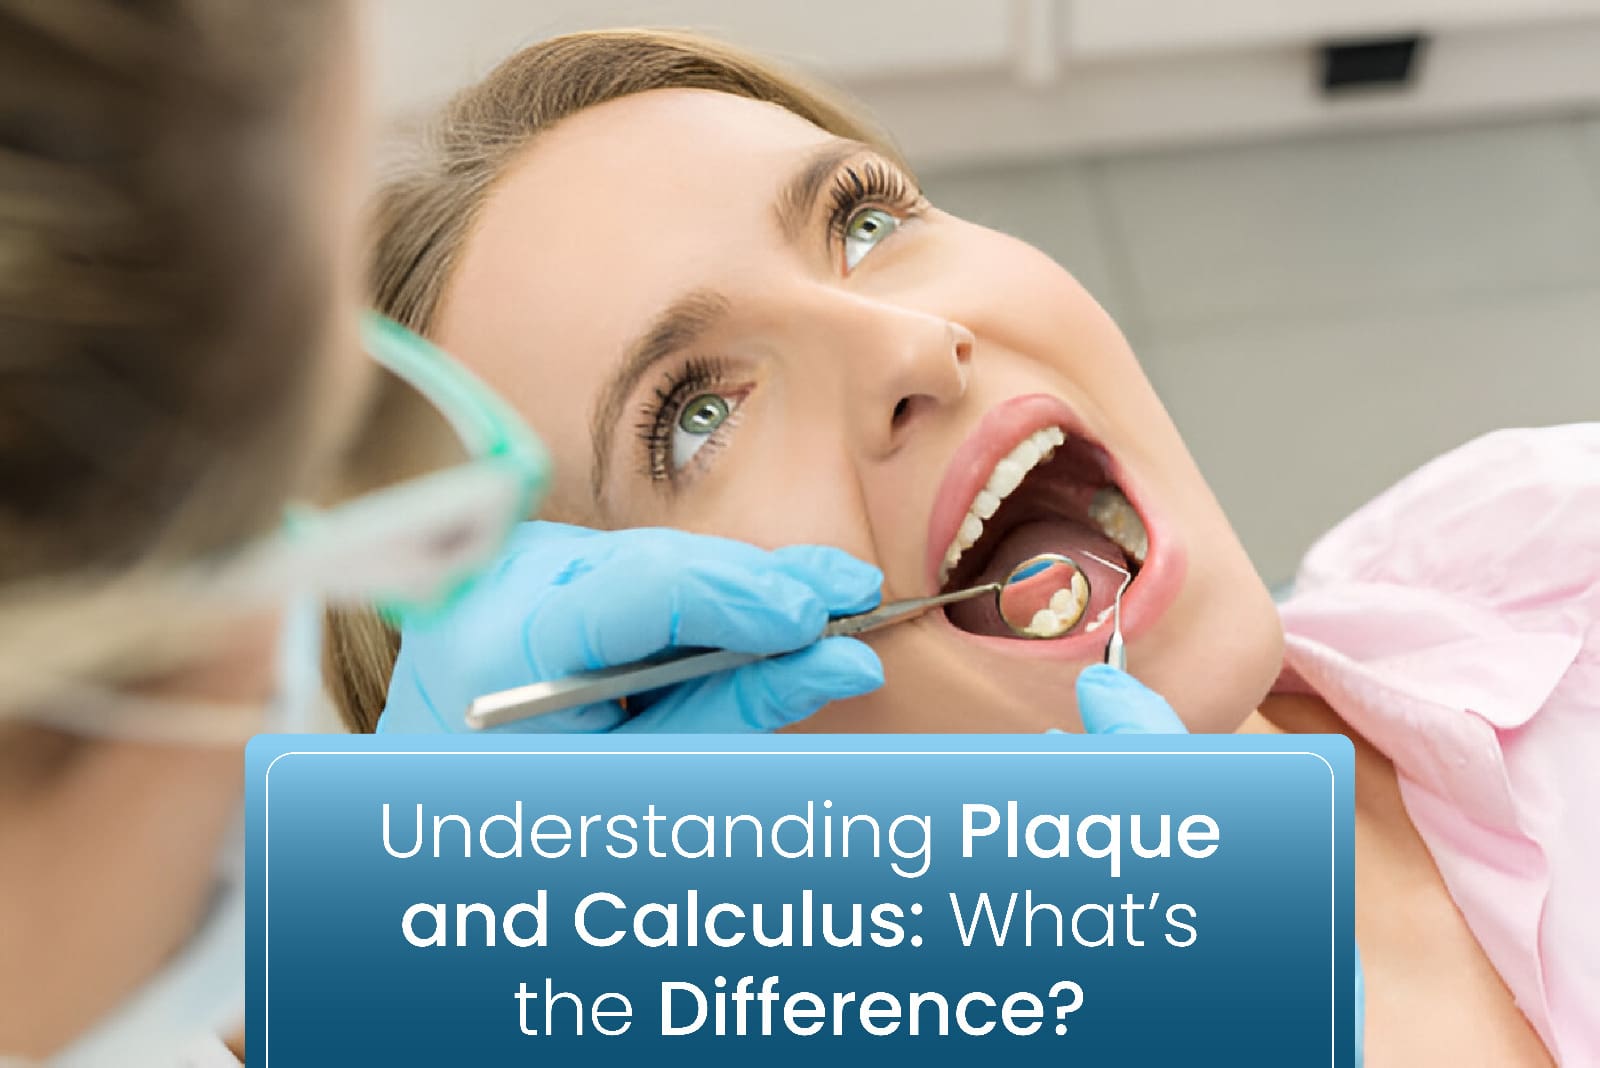 Understanding Plaque and Calculus: What’s the Difference?